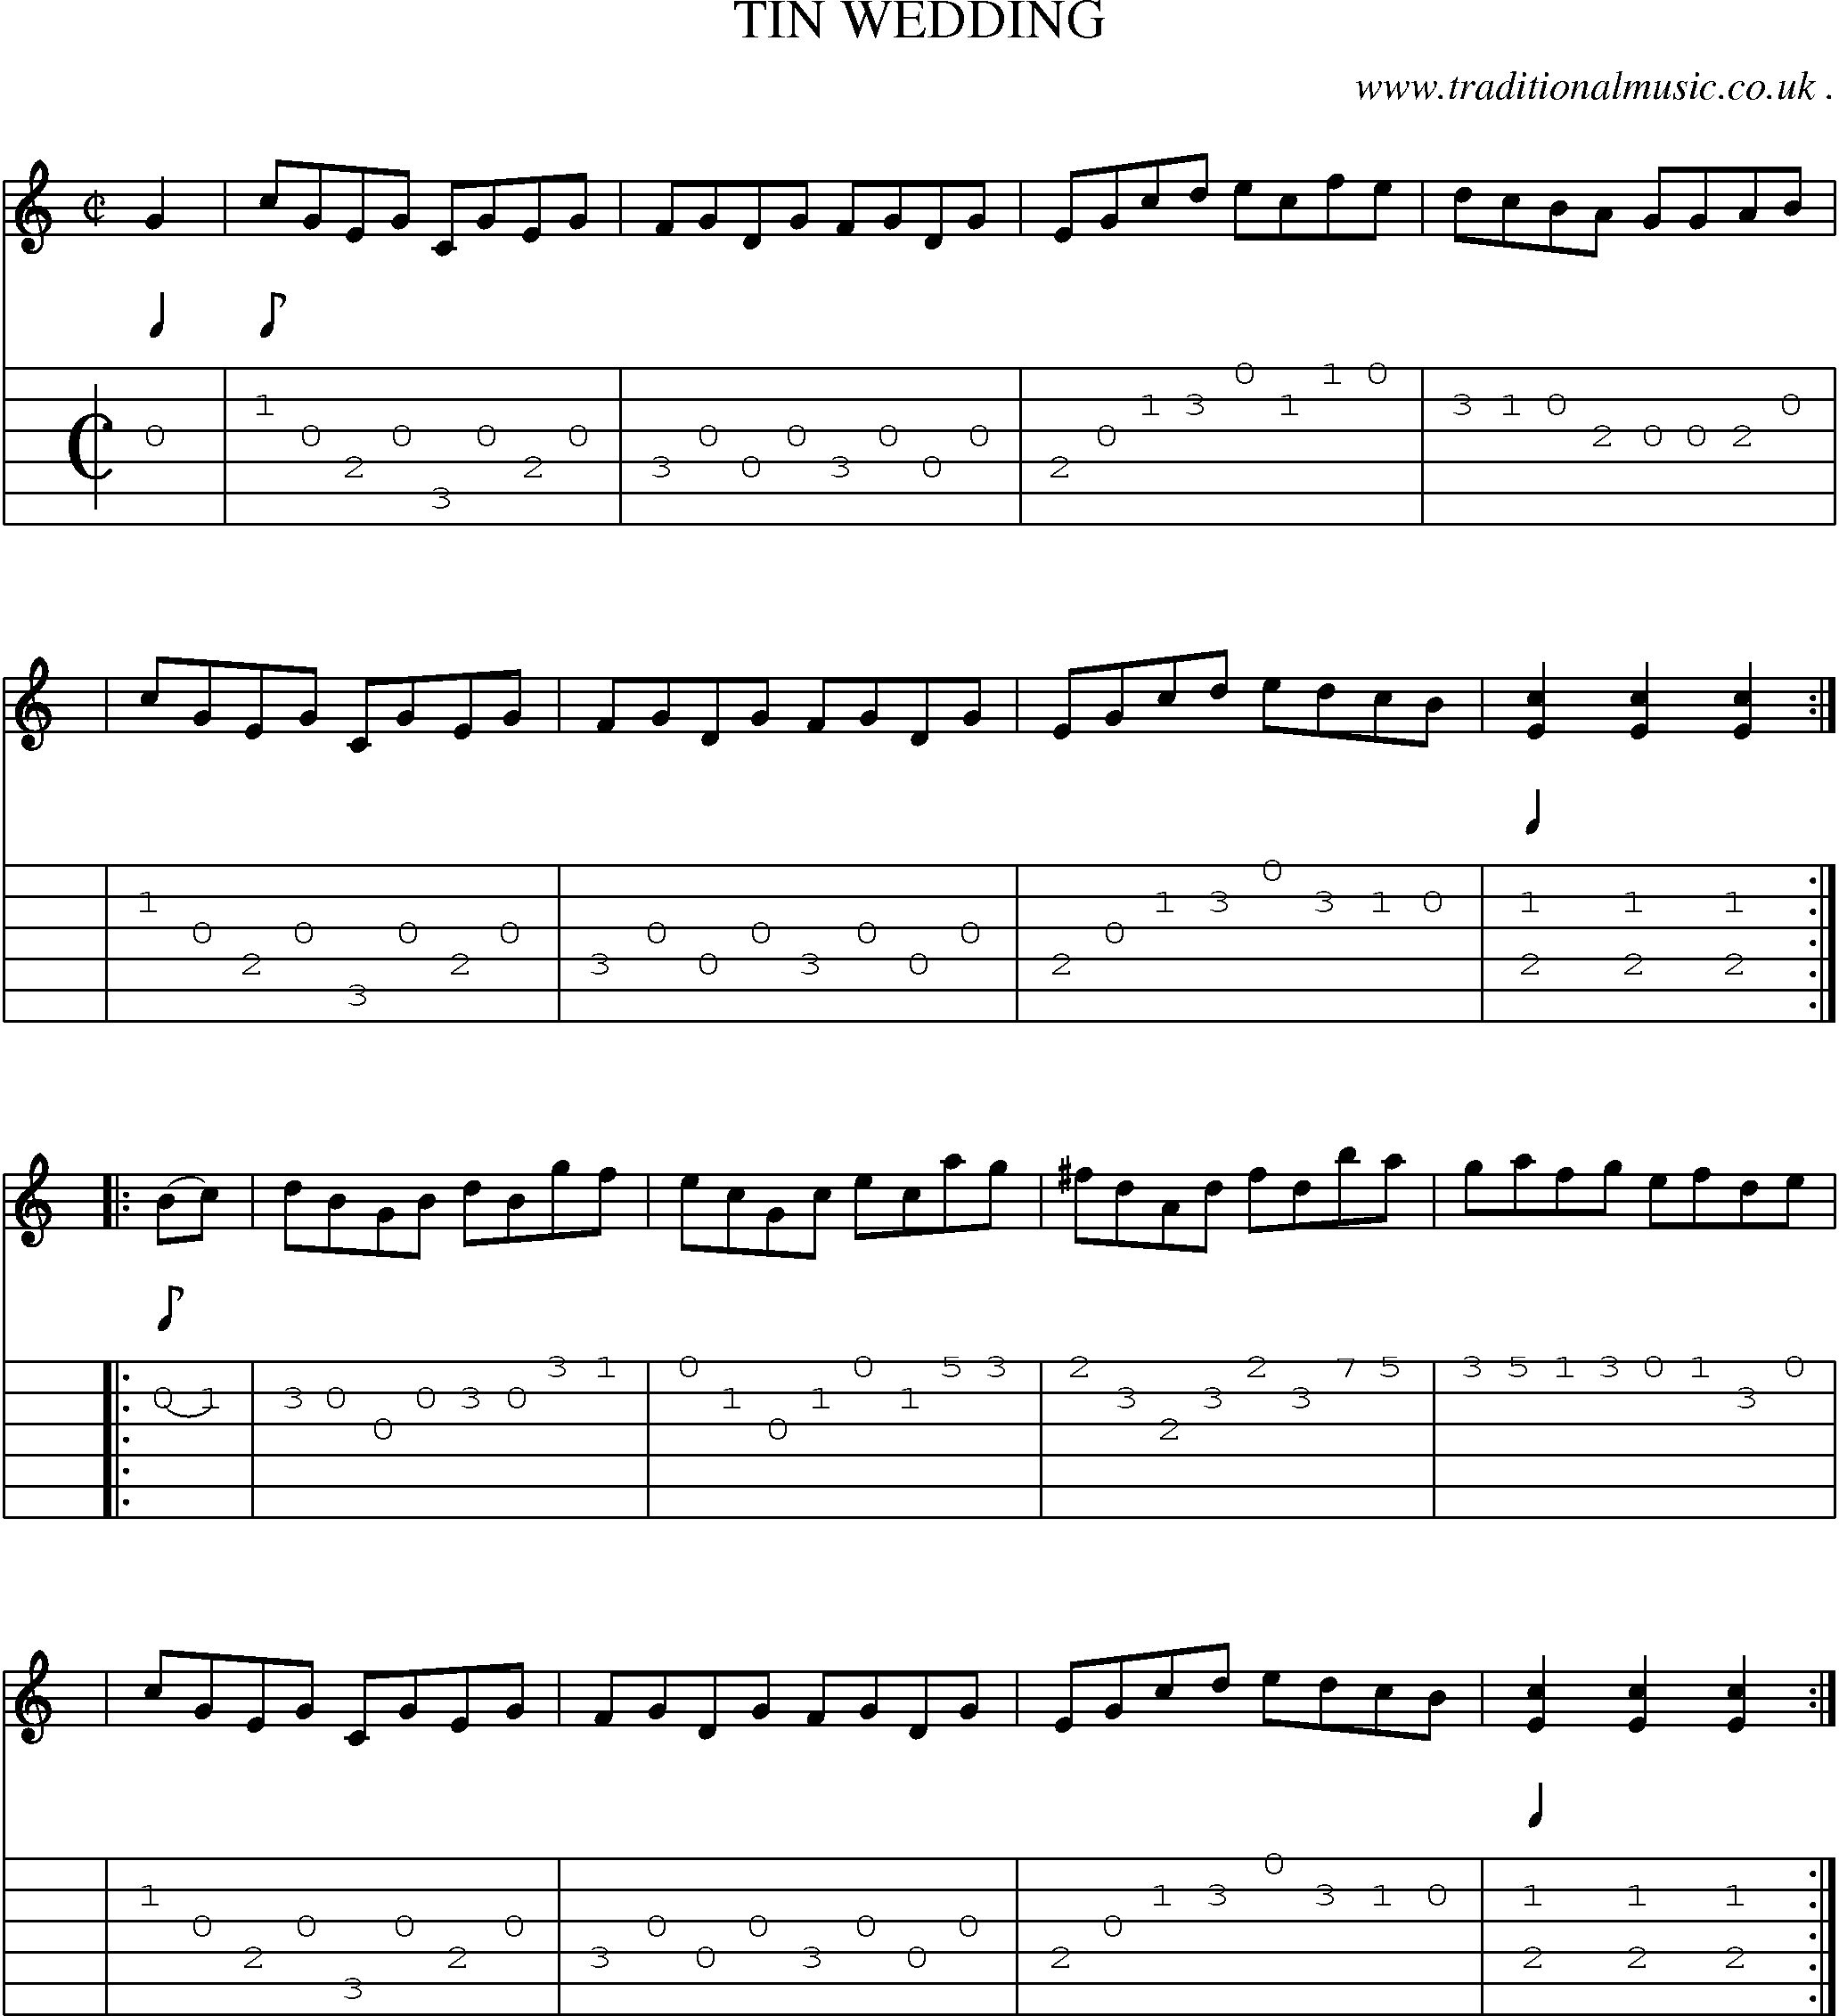 Sheet-Music and Guitar Tabs for Tin Wedding